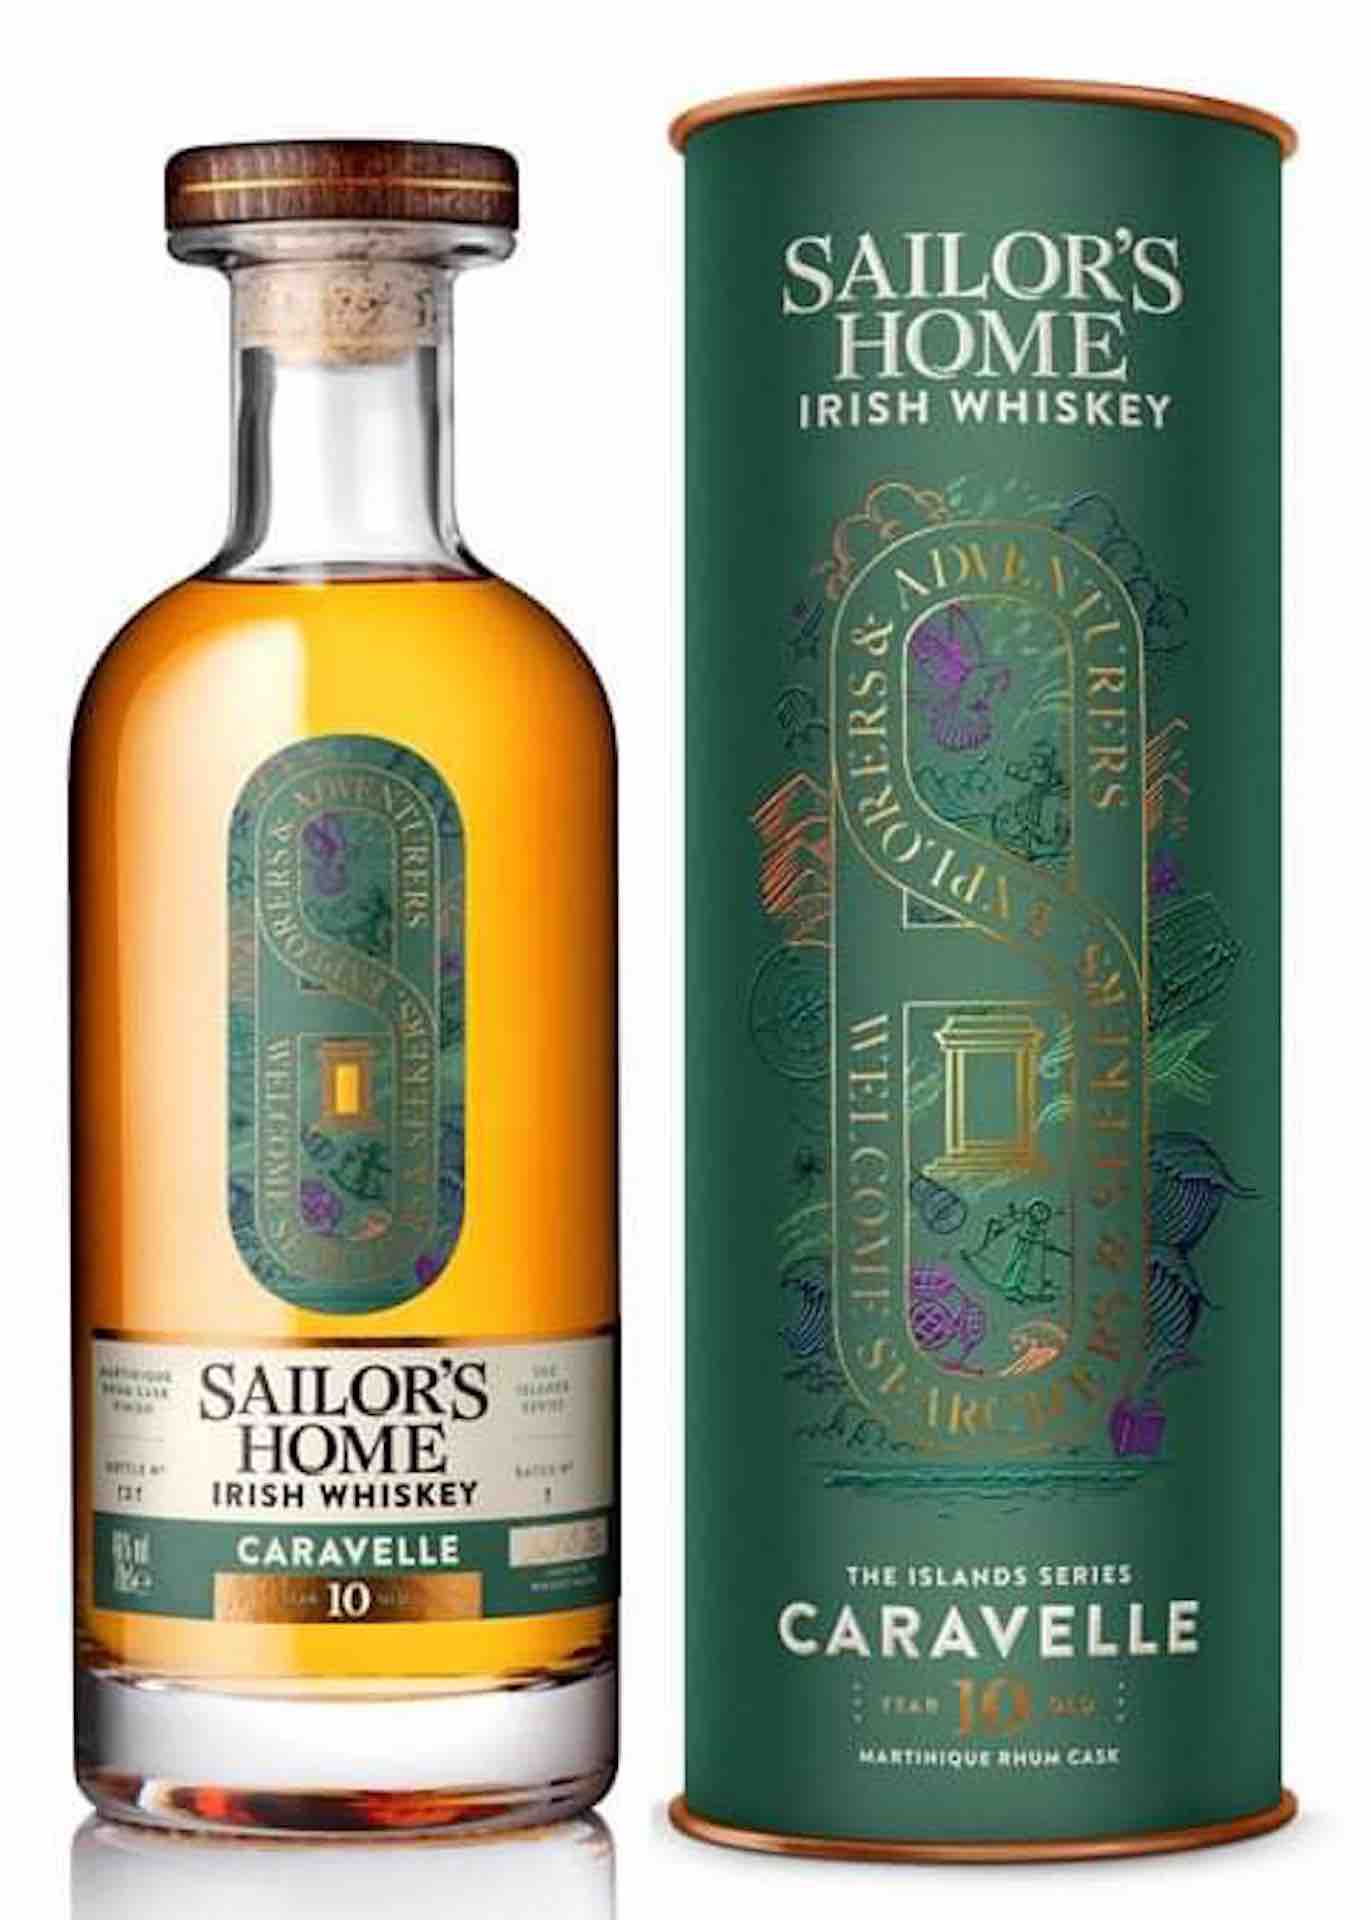 Sailor's Home: Caravelle 10 Year Old Irish Whiskey